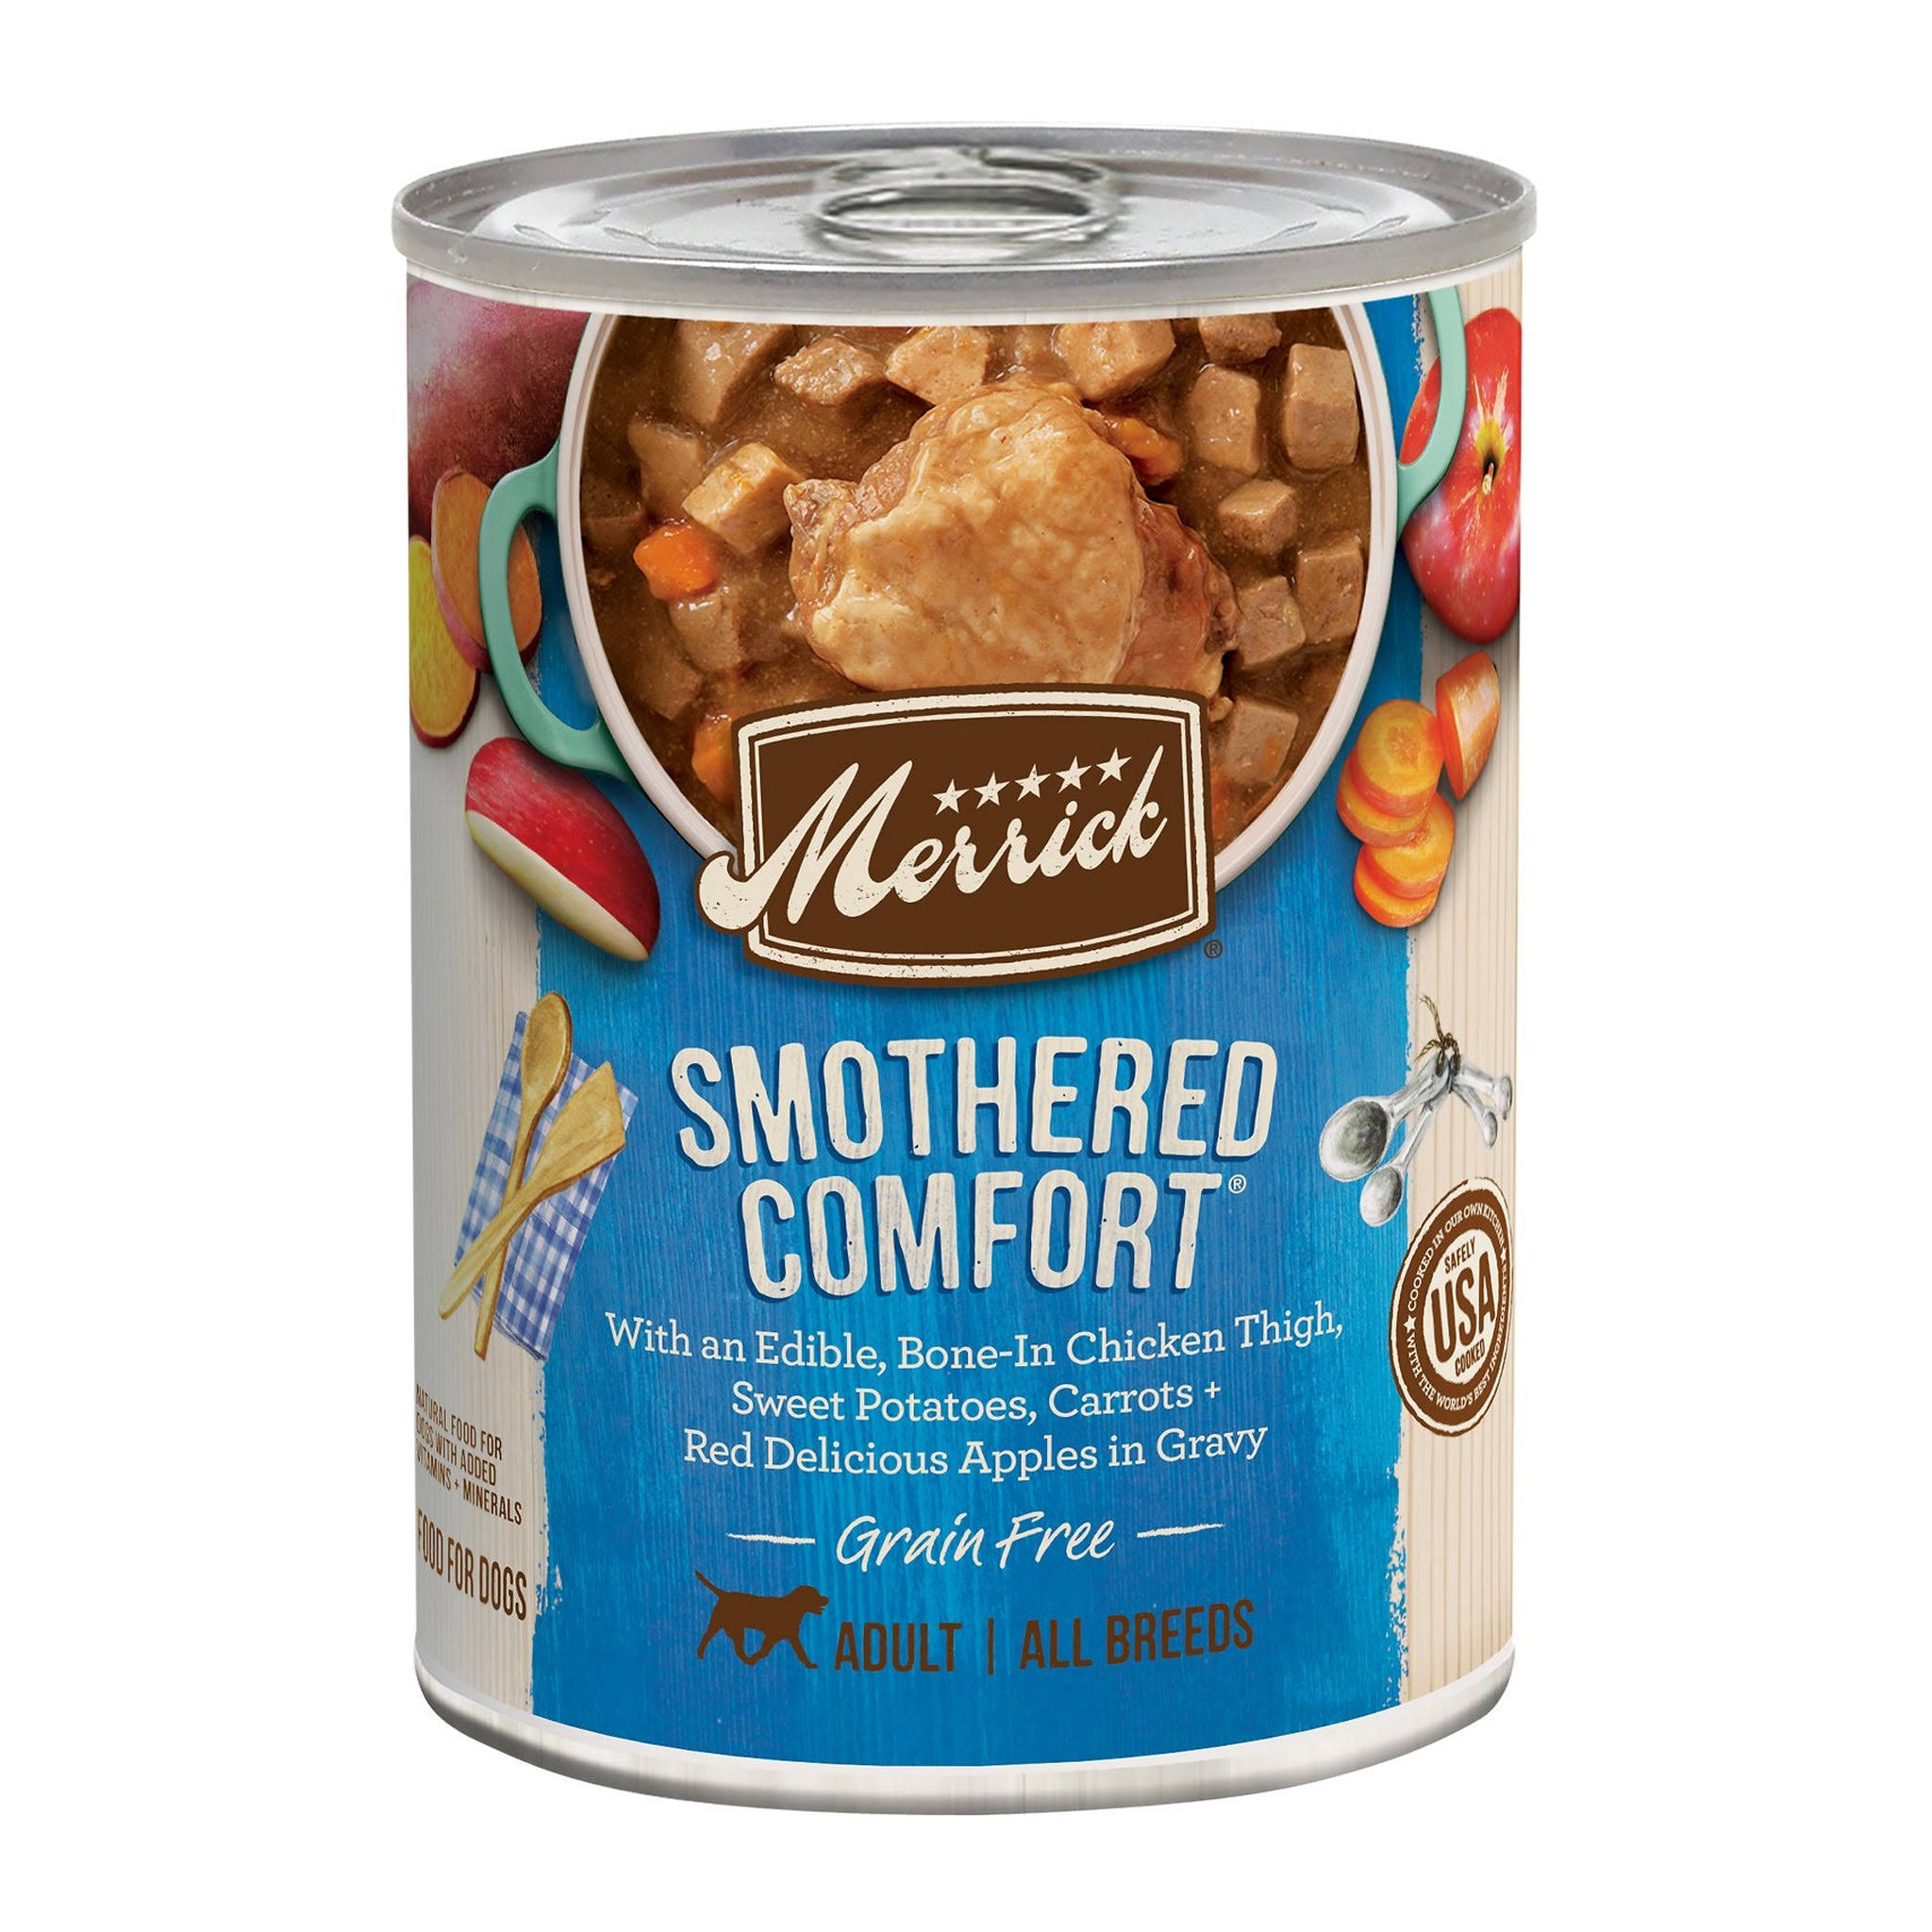 Merrick Smothered Comfort Grain Free Canned Dog Food 12.7oz